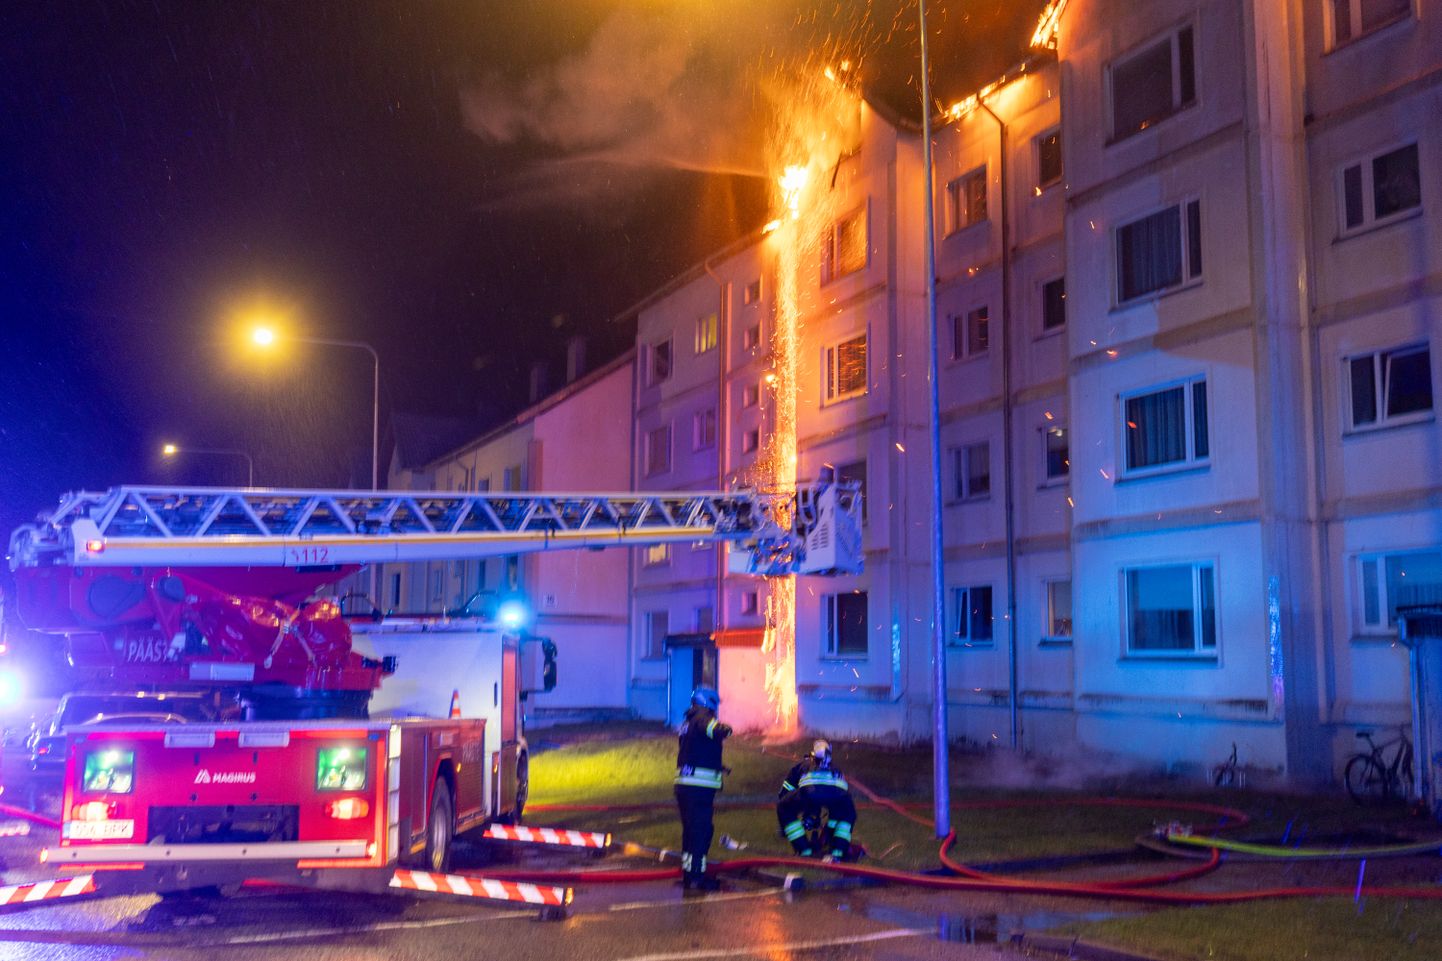 A four-storey apartment building caught fire in the southern Estonian town of Viljandi on Friday evening after a gas cylinder exploded on one of the balconies.